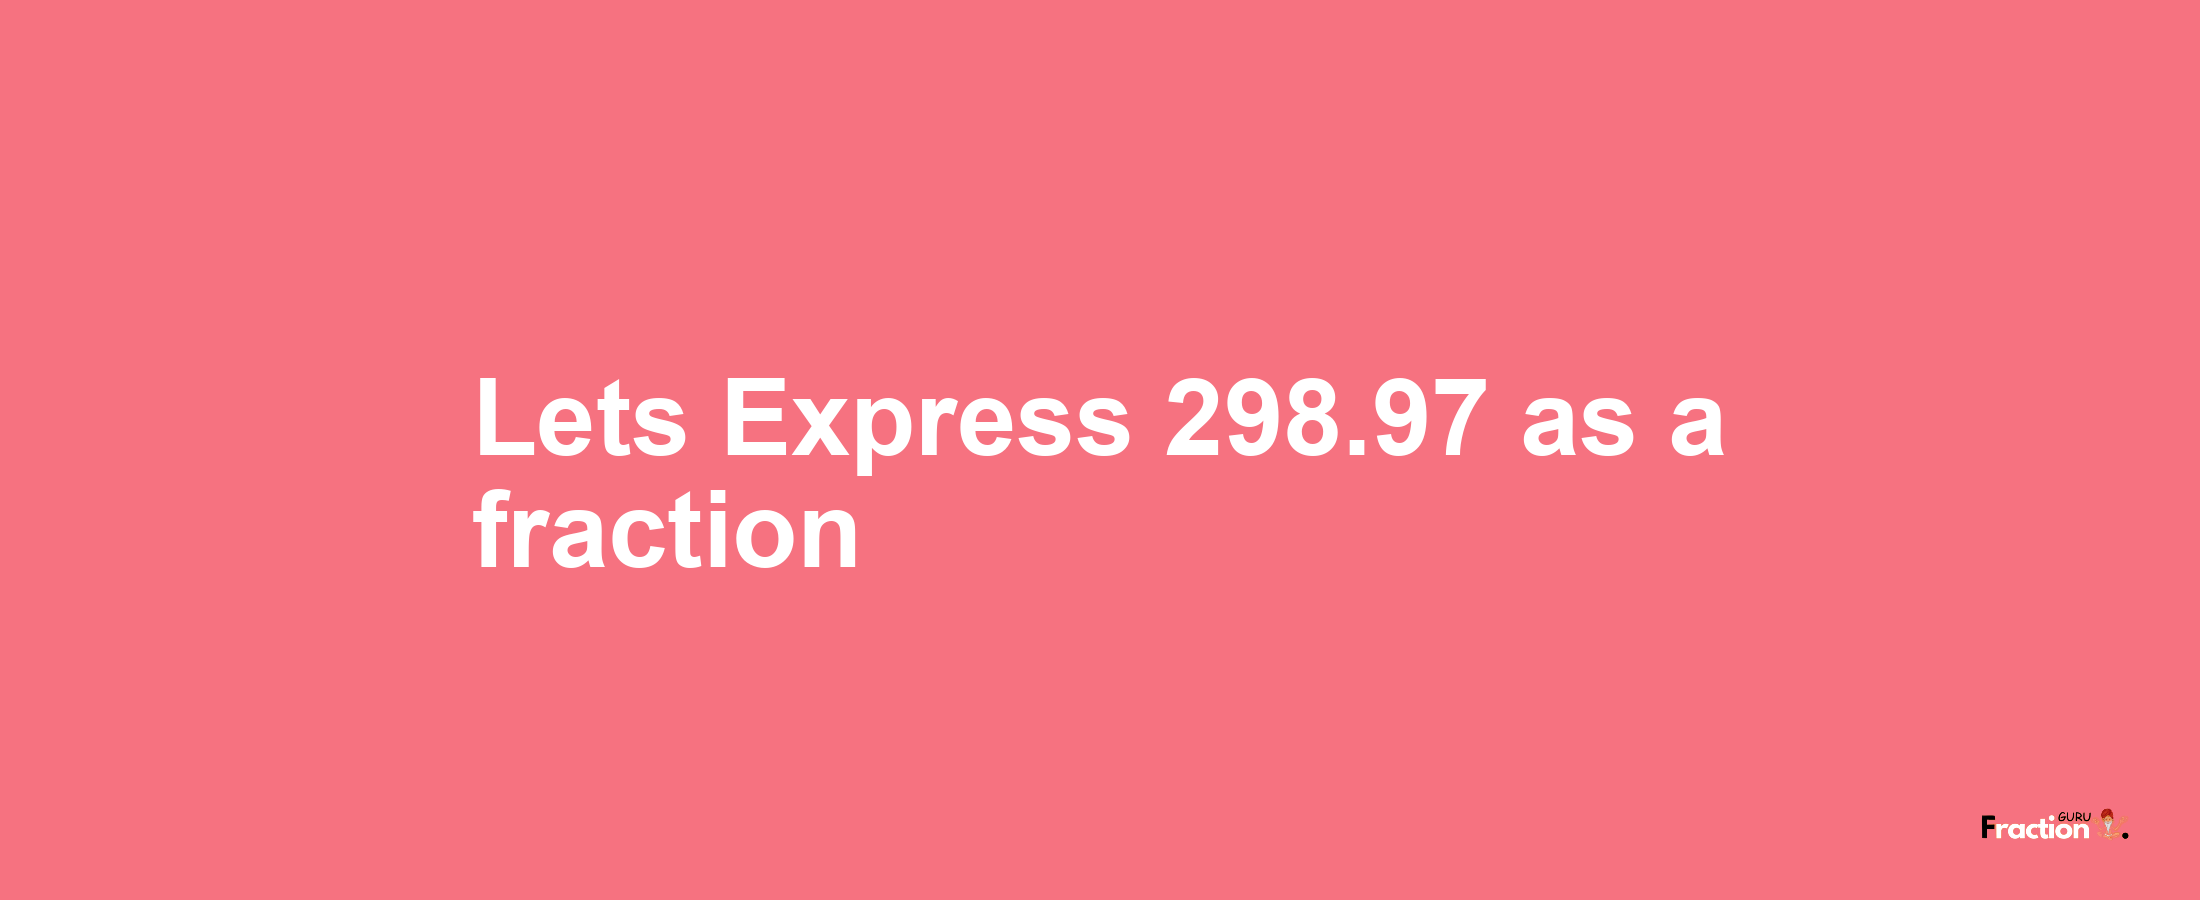 Lets Express 298.97 as afraction